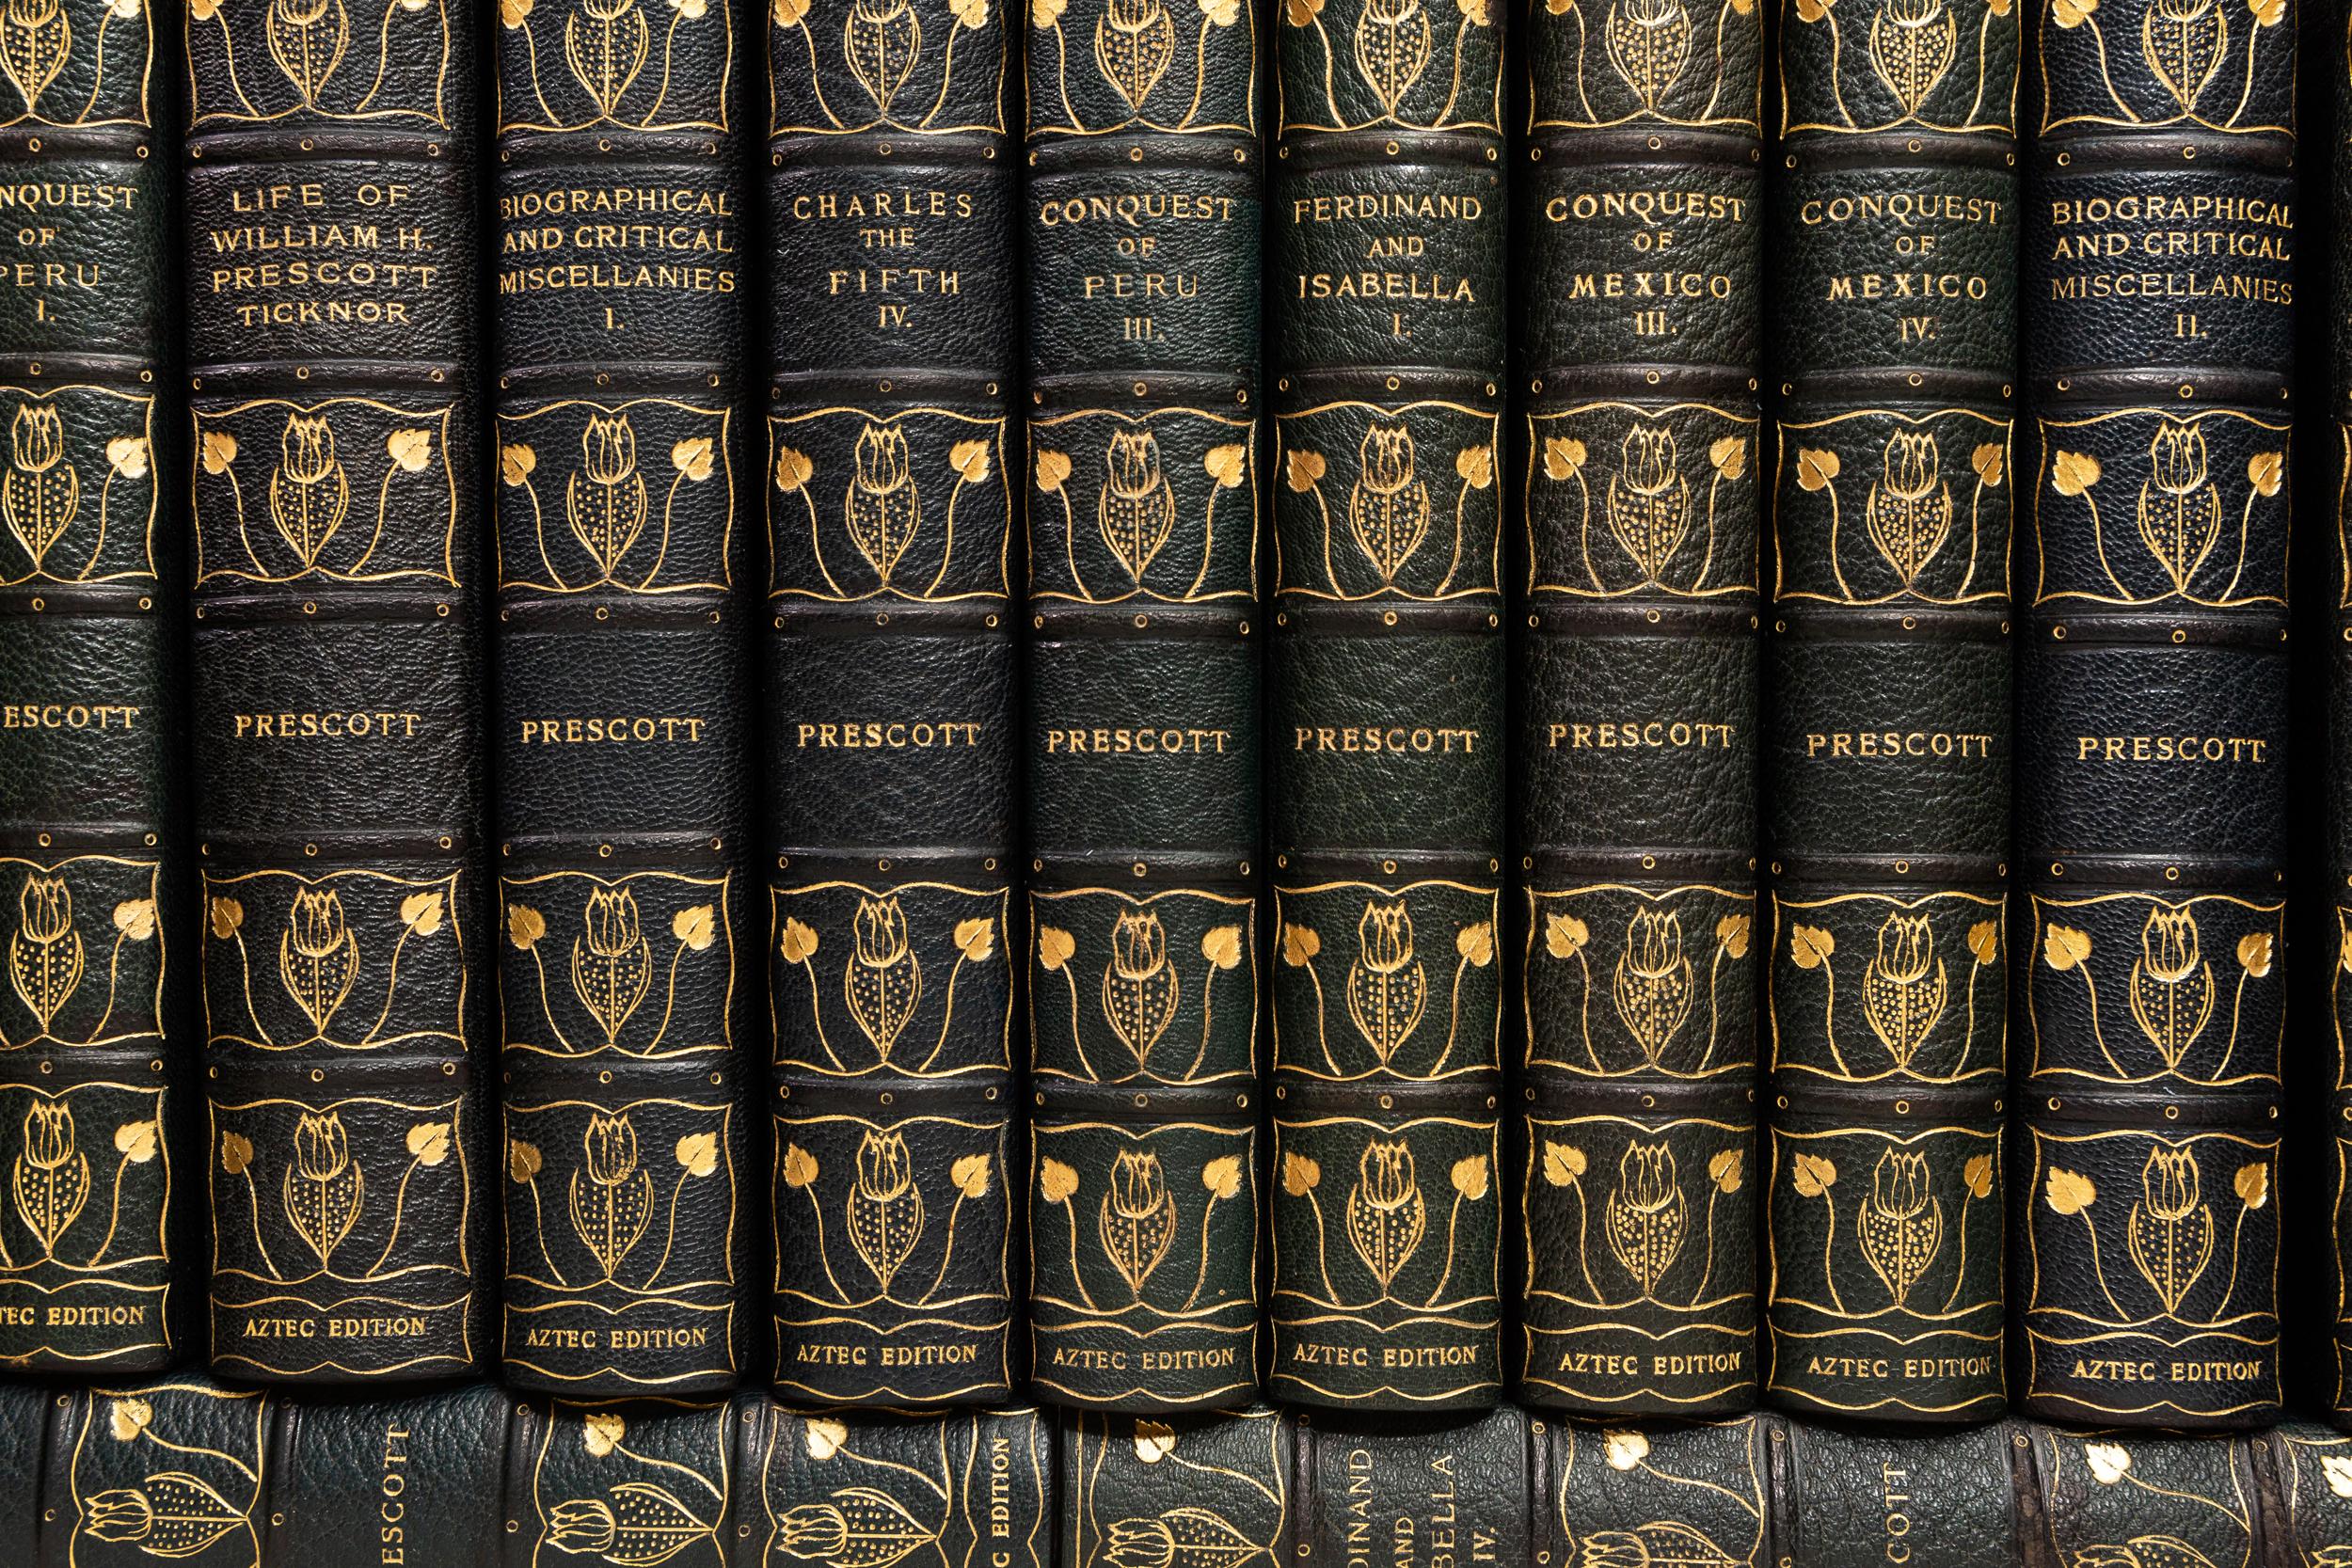 22 Volumes. William H. Prescott, The Works of William H. Prescott. Titles include, Philip the Second, Ferdinand and Isabella, Charles the Fifth, and more. Bound in 3/4 blue morocco. Marbled boards. Raised bands. Decorative floral emblems in gilt on